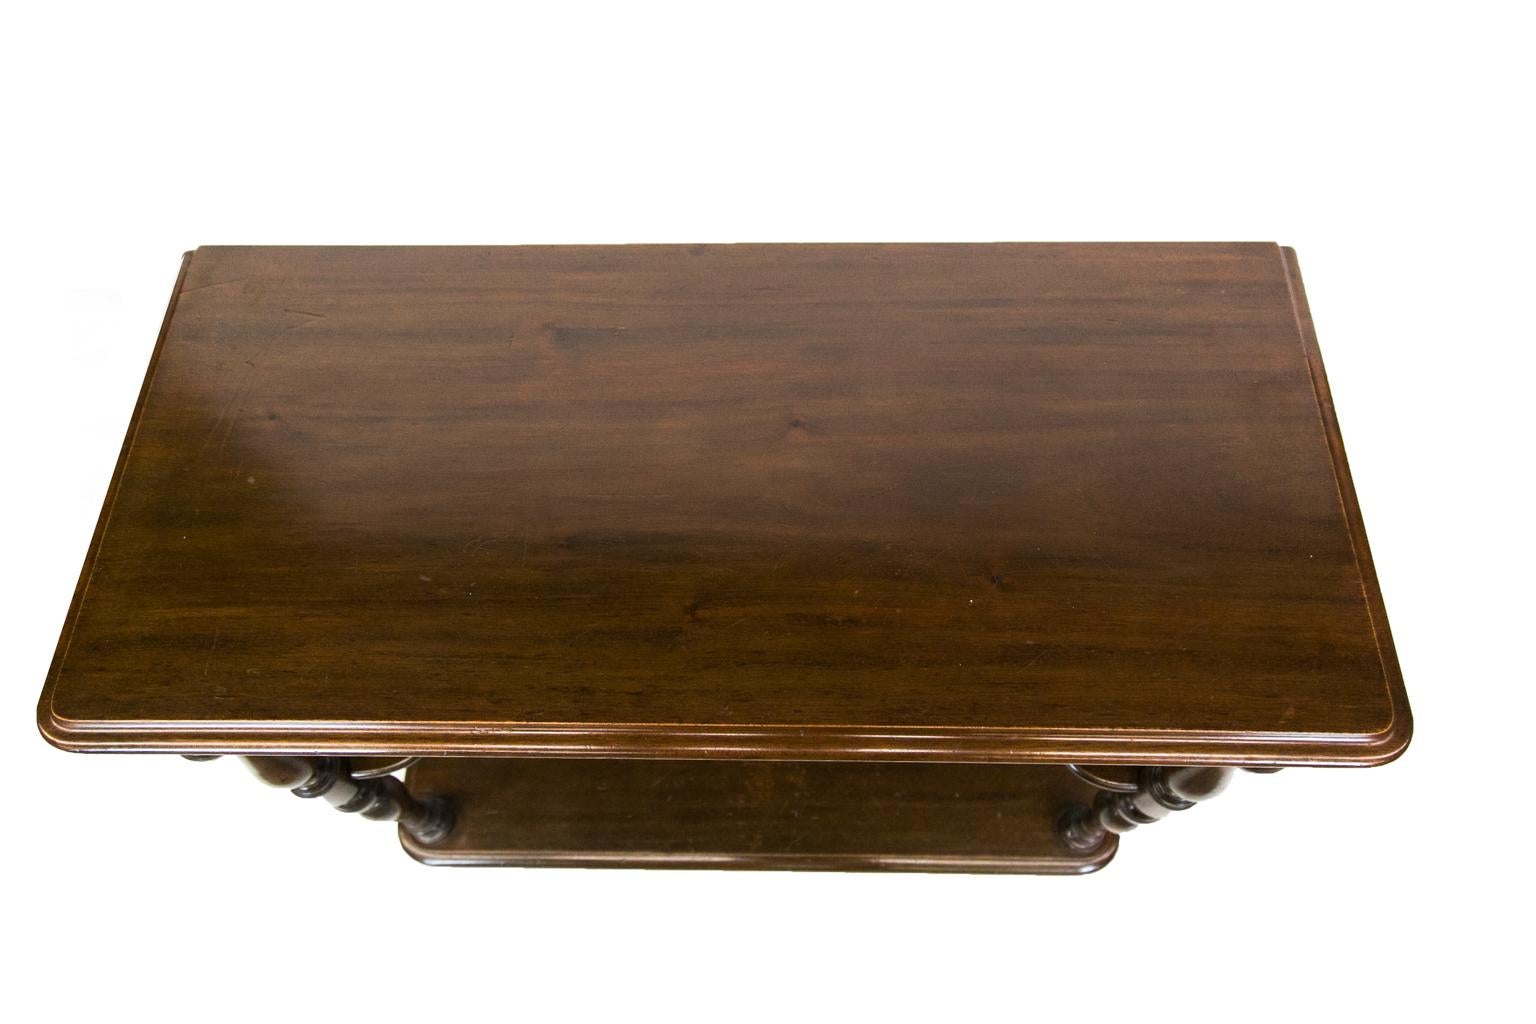 English mahogany three-tiered server has an ogee molded top with turned front shelf supports. The top apron has 1/4” beaded molding, and the center shelf has convex shaping. It rests on a solid plinth base.
 